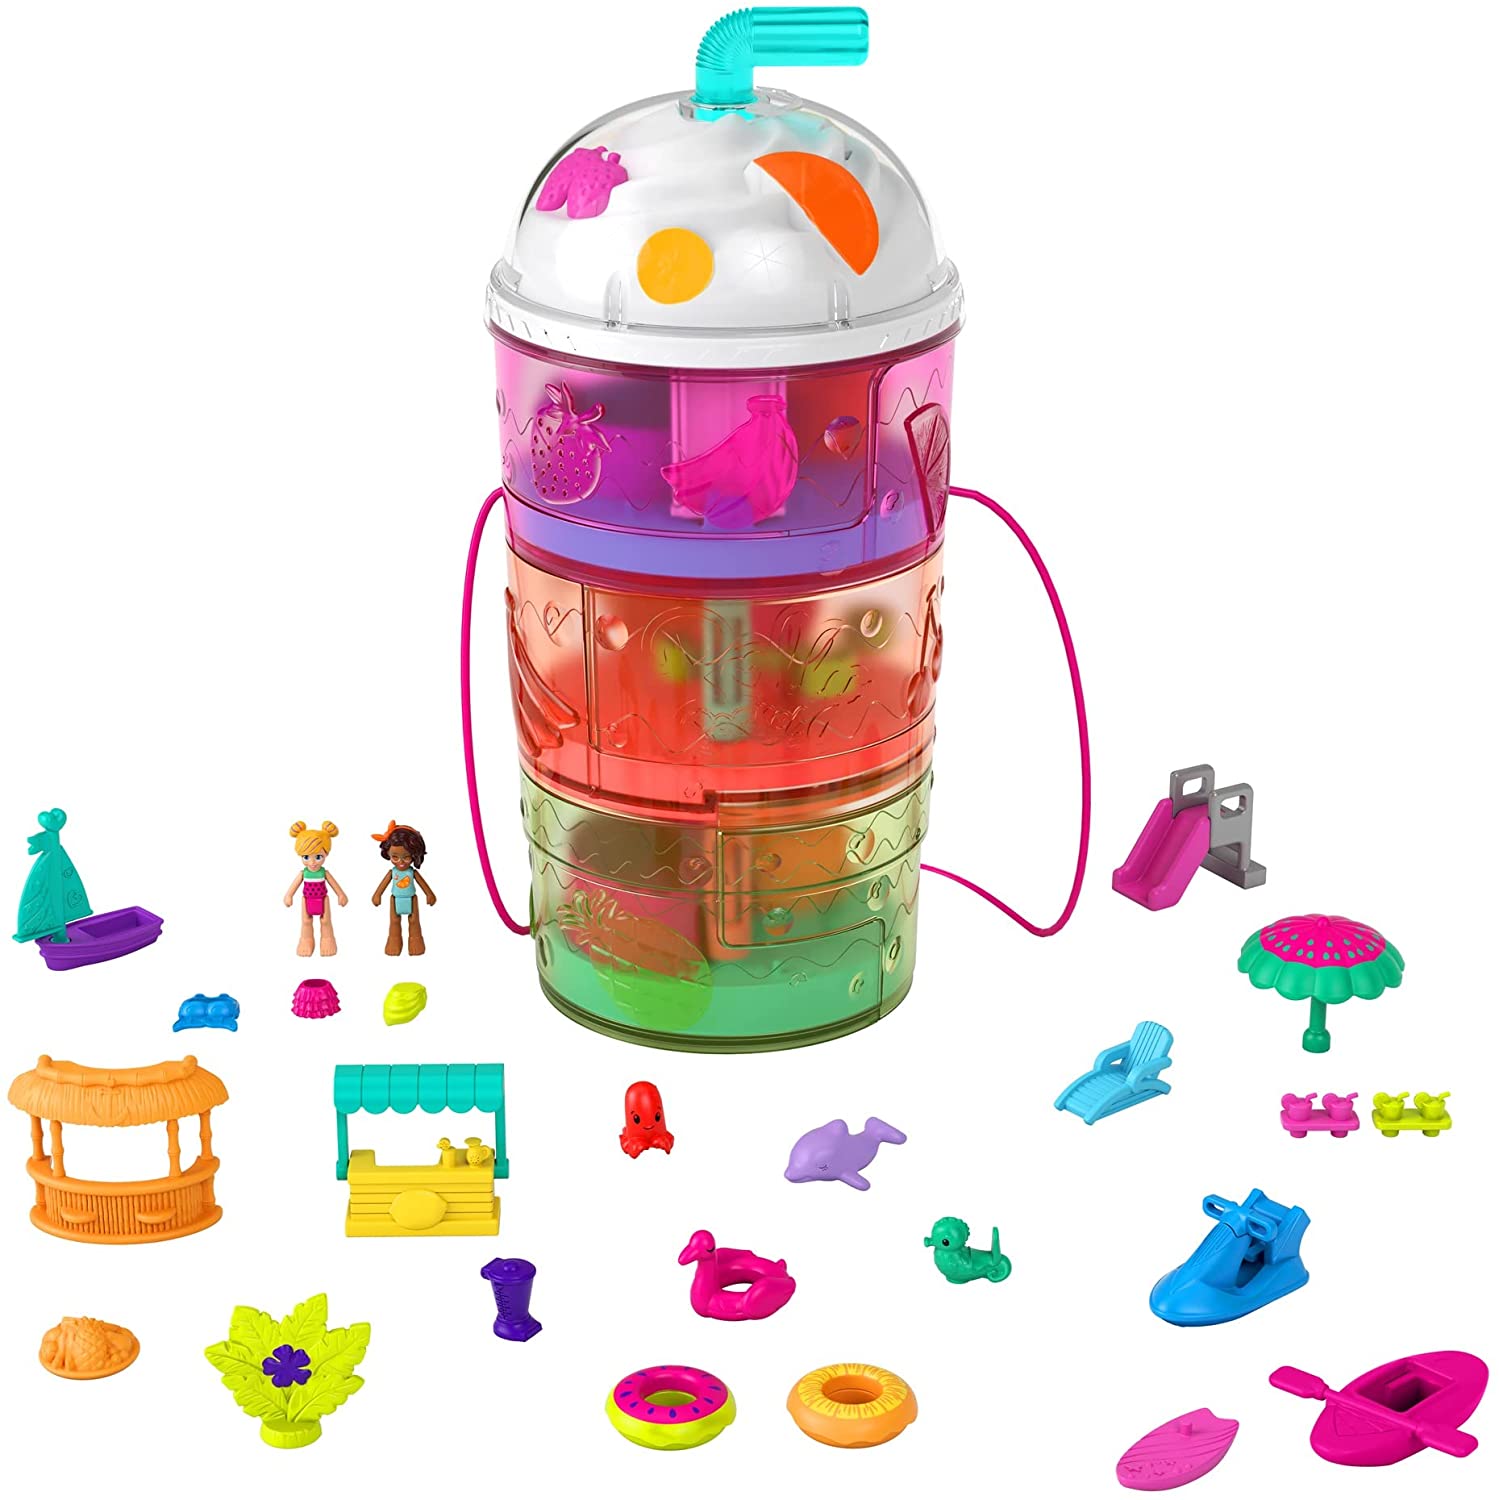 Polly Pocket Spin 'n Surprise Compact Playset, Tropical Smoothie